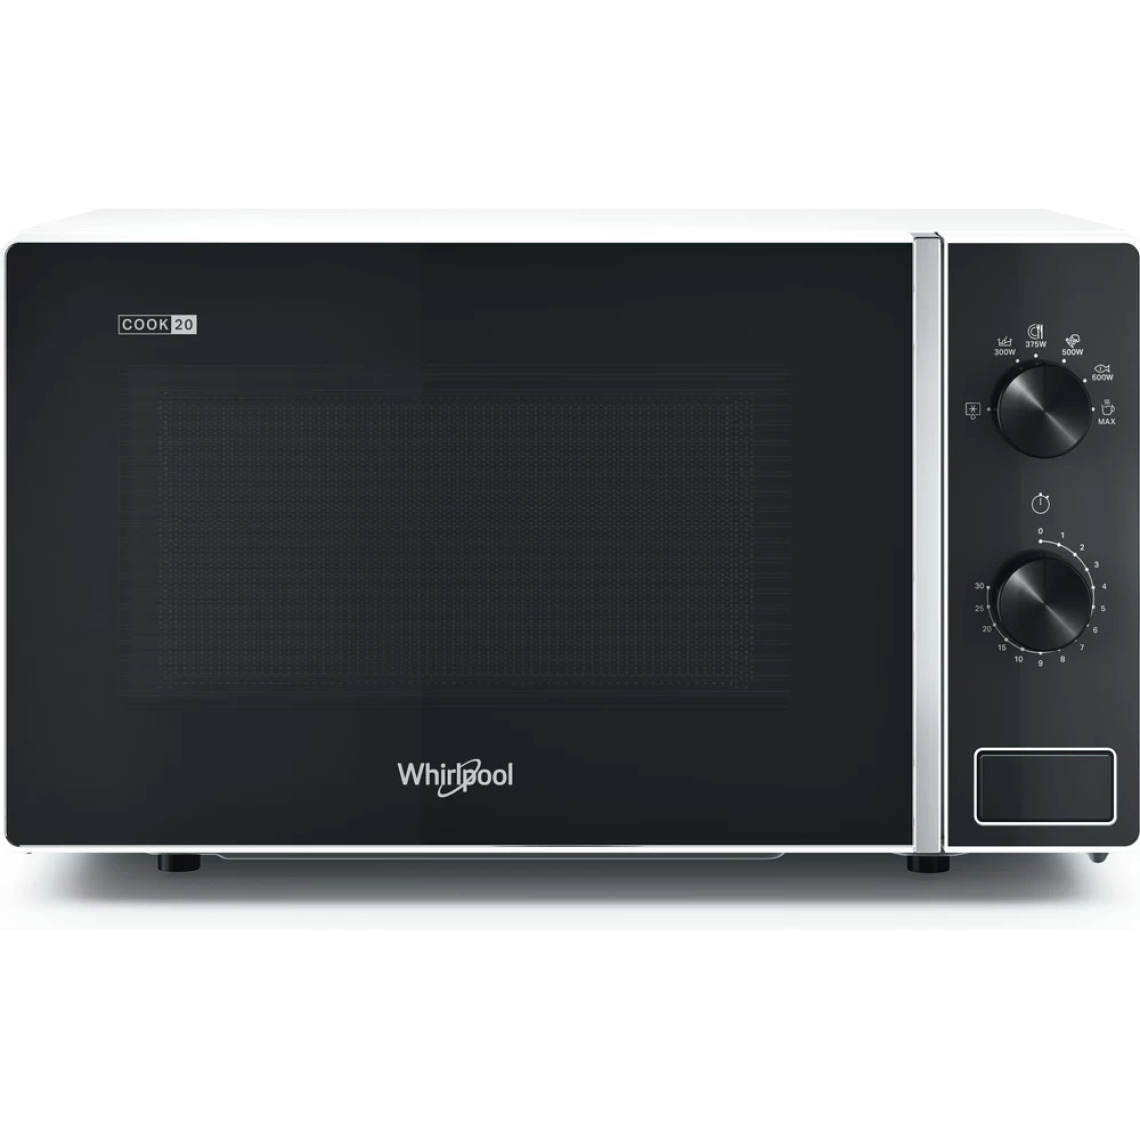 whirlpool - Micro-ondes Pose Libre 20l Whirlpool 700w 32cm, Mwp 101 W - Four micro-ondes